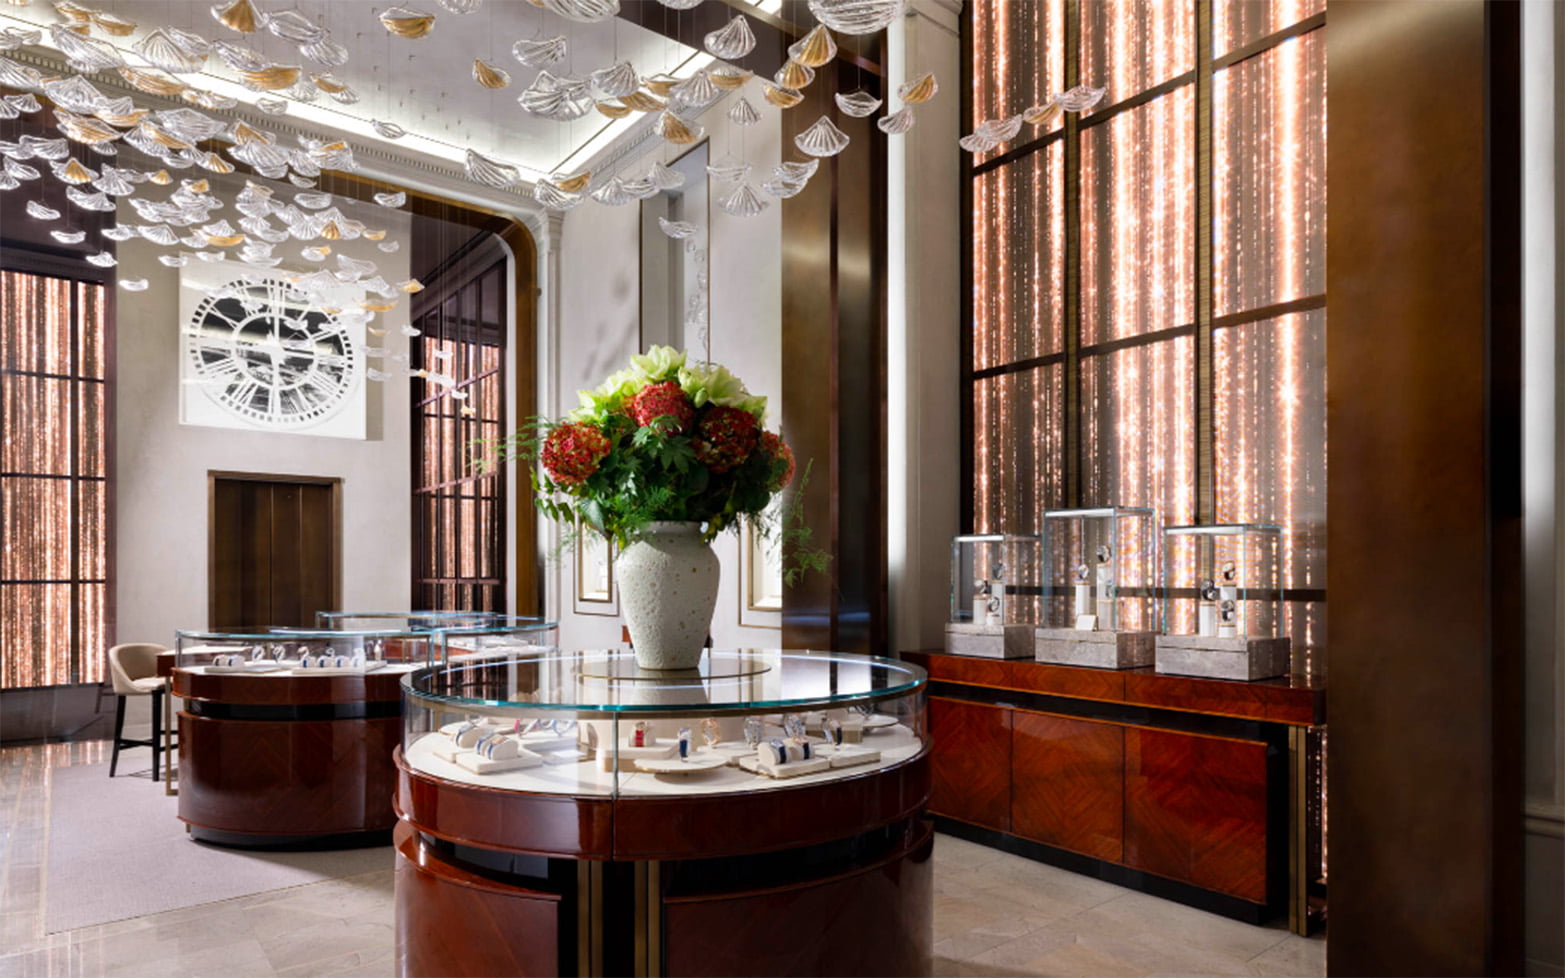 Chopard has opened a new flagship store on Fifth Avenue in New York City
